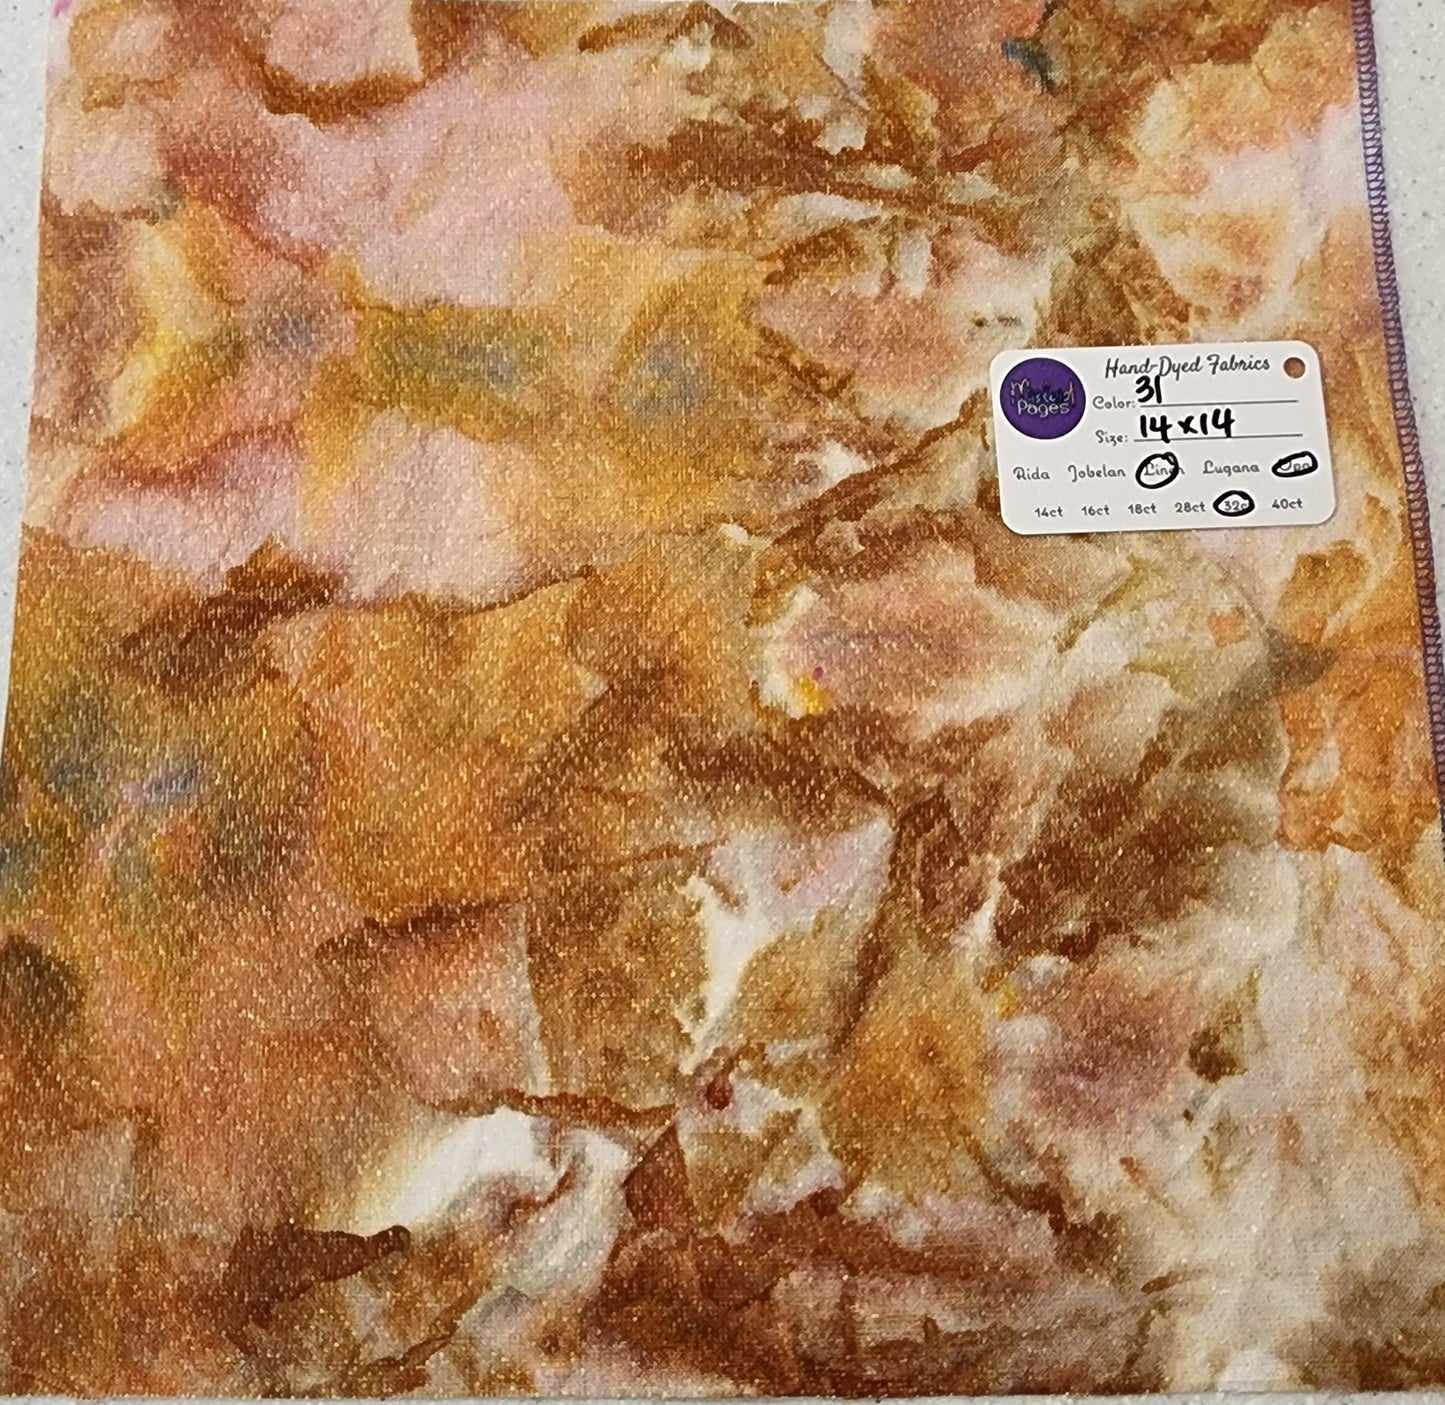 40ct Opal Linen - "Autumn's Bounty" Lot #31 - Hand-Dyed Fabric - October 2022 Release